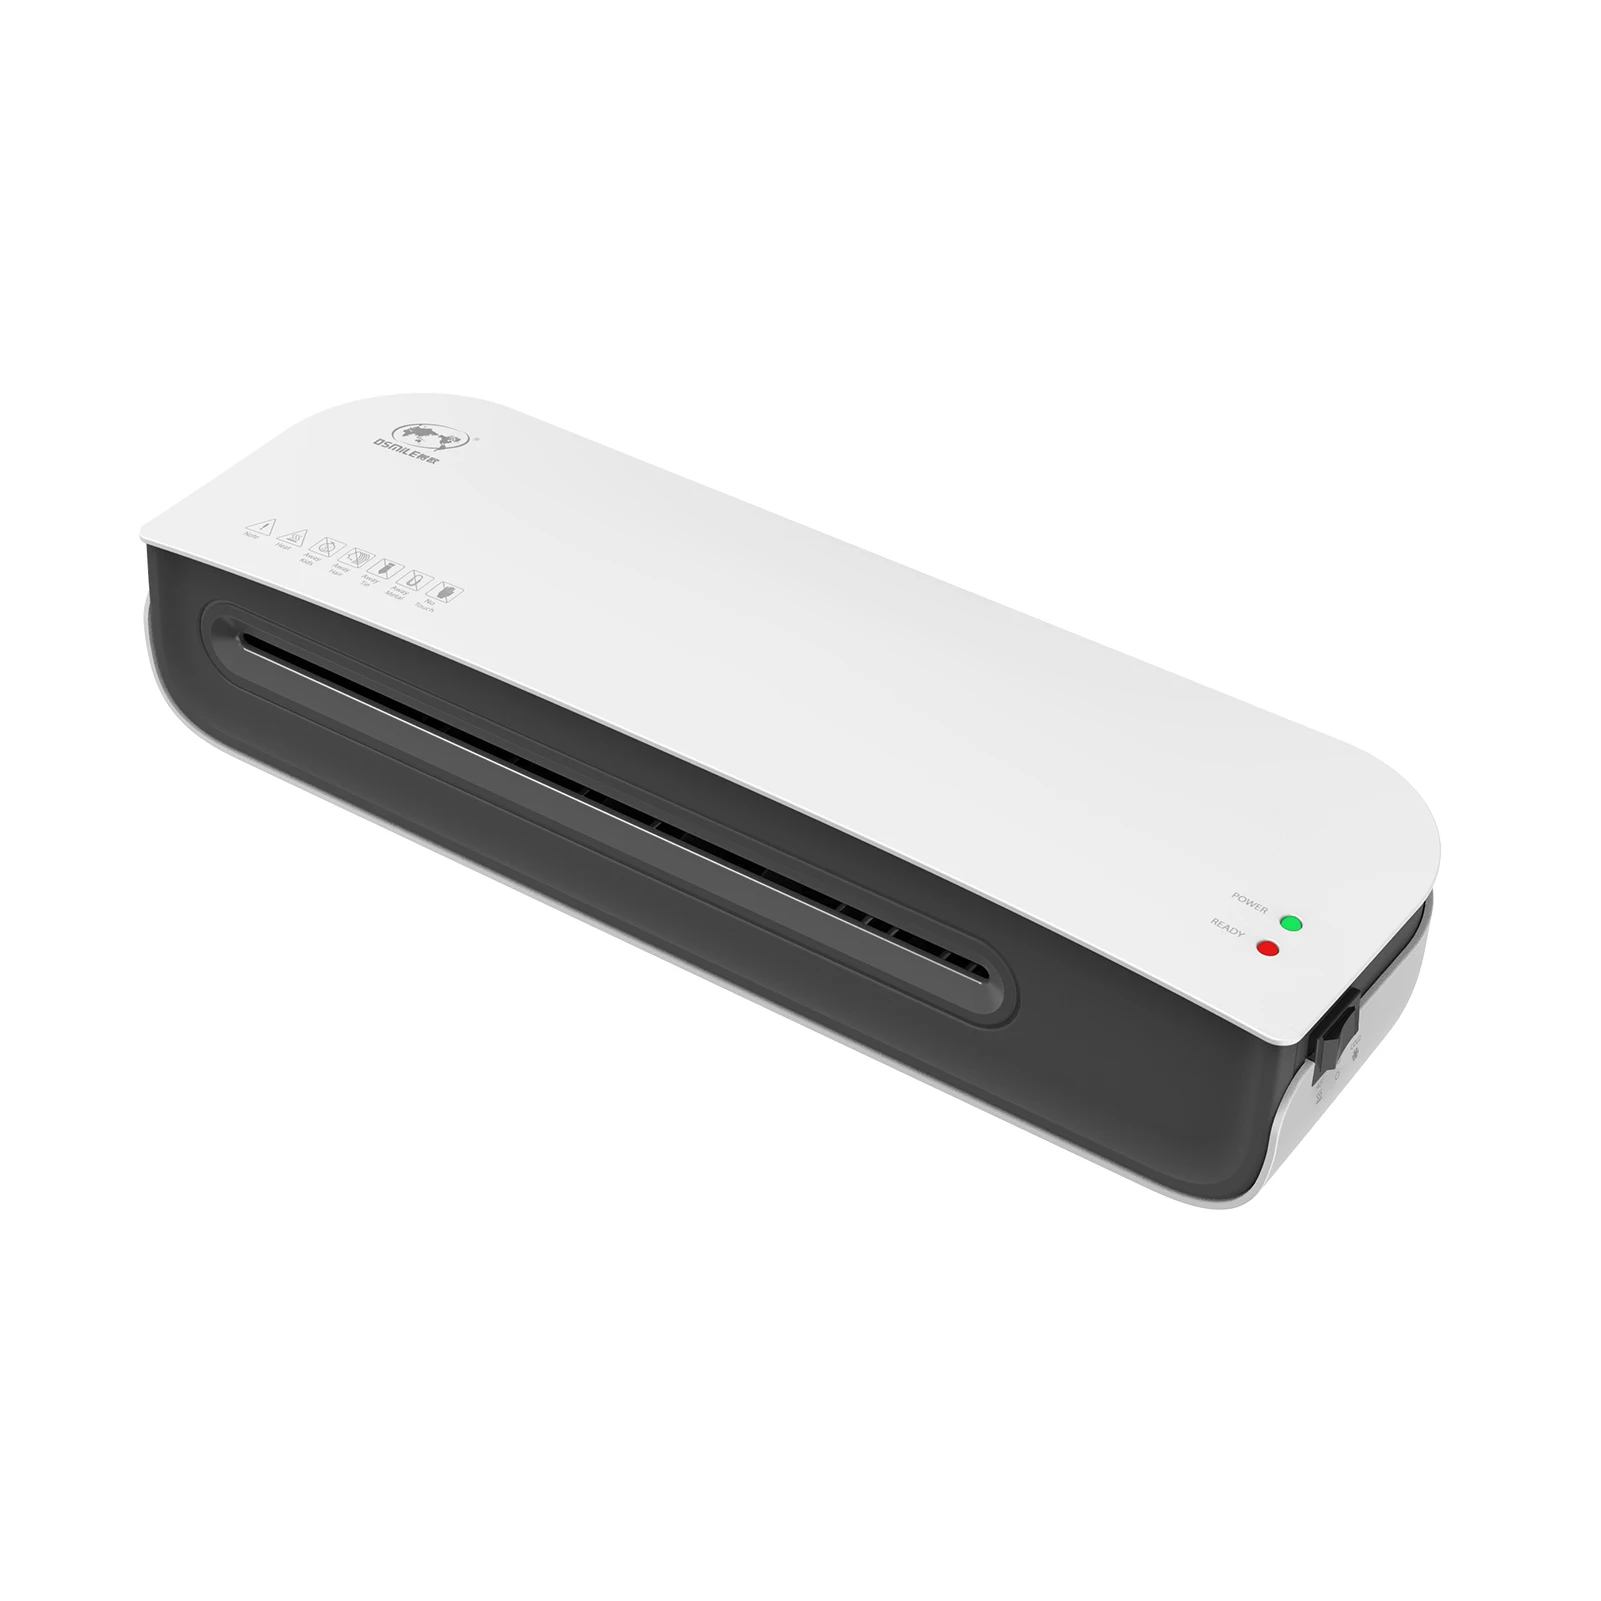 OSMILE SL289 Desktop Laminator Machine Set A4 Size Hot and Cold Lamination 2 Roller System for Home Office School Supplies